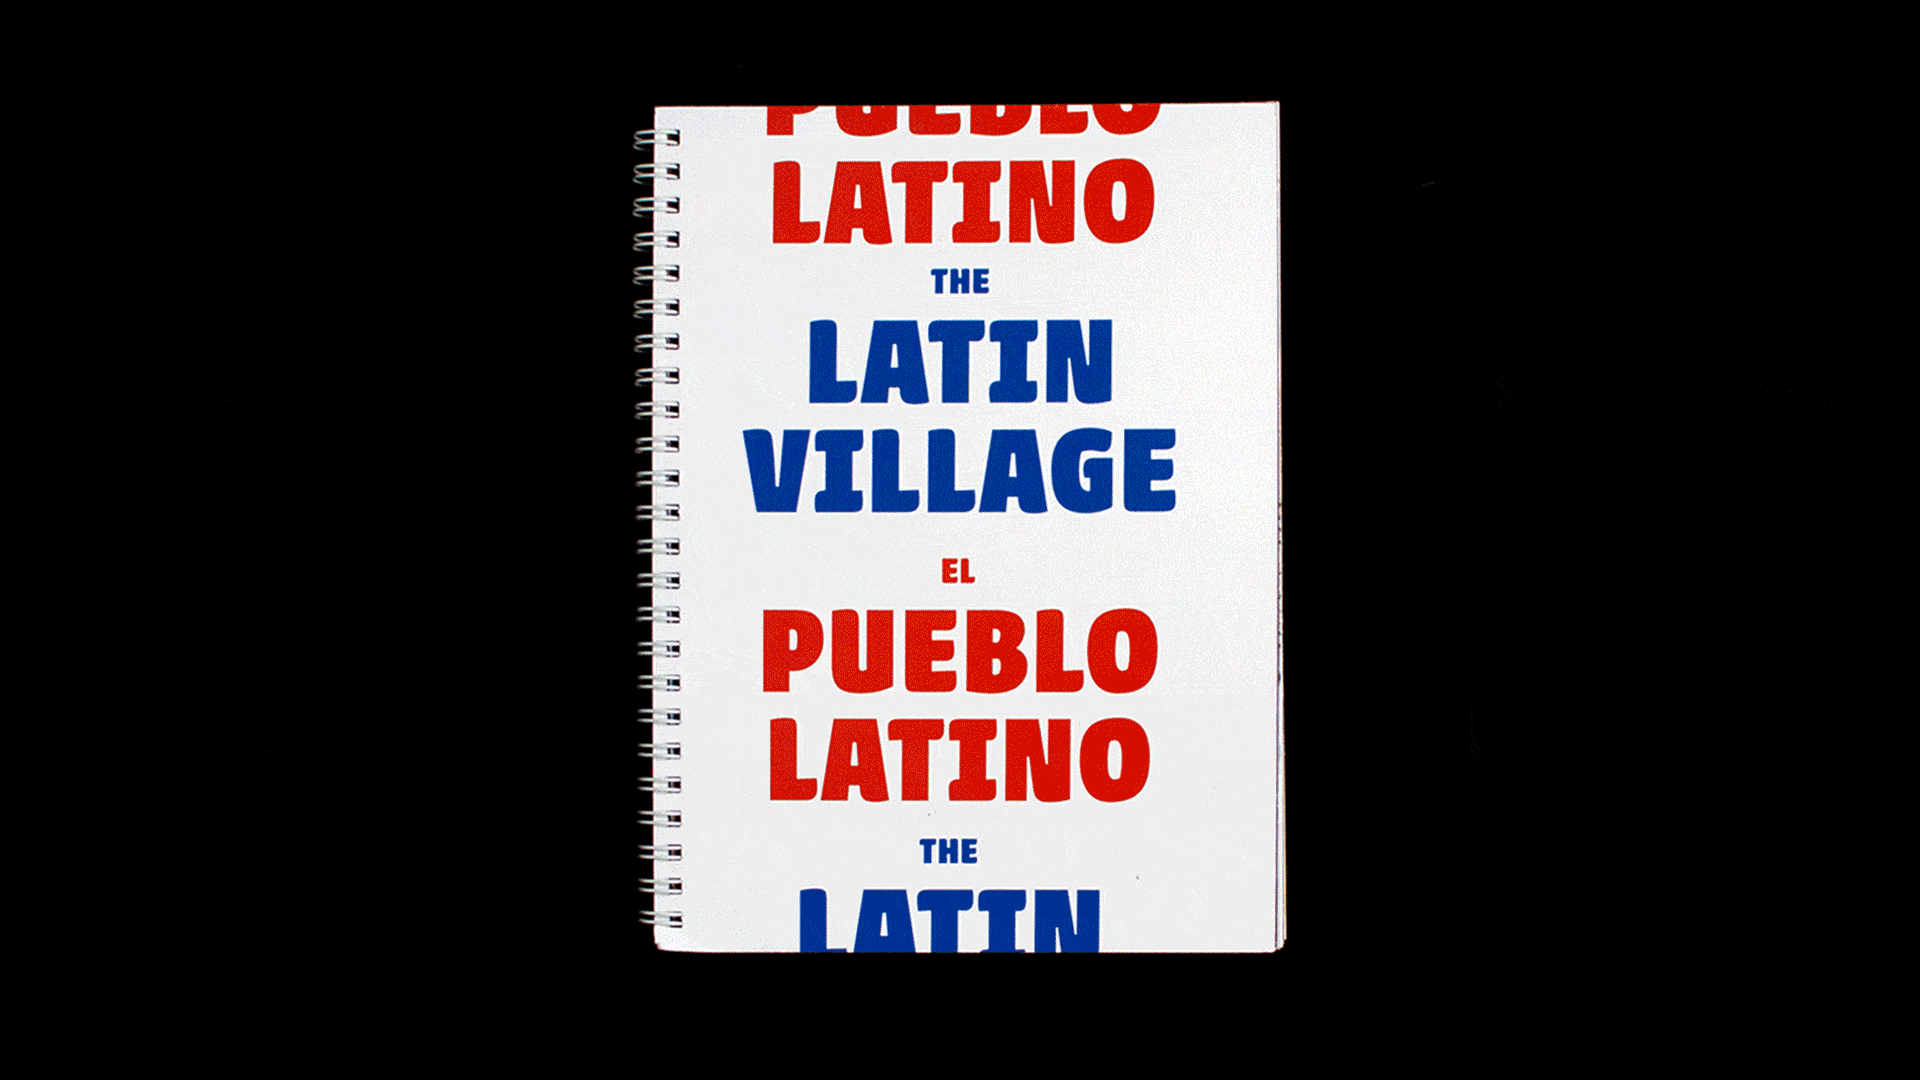 A series of changing photographs and images, which look like the pages of a spiral bound book with the title ‘The Latin Village’, being turned.